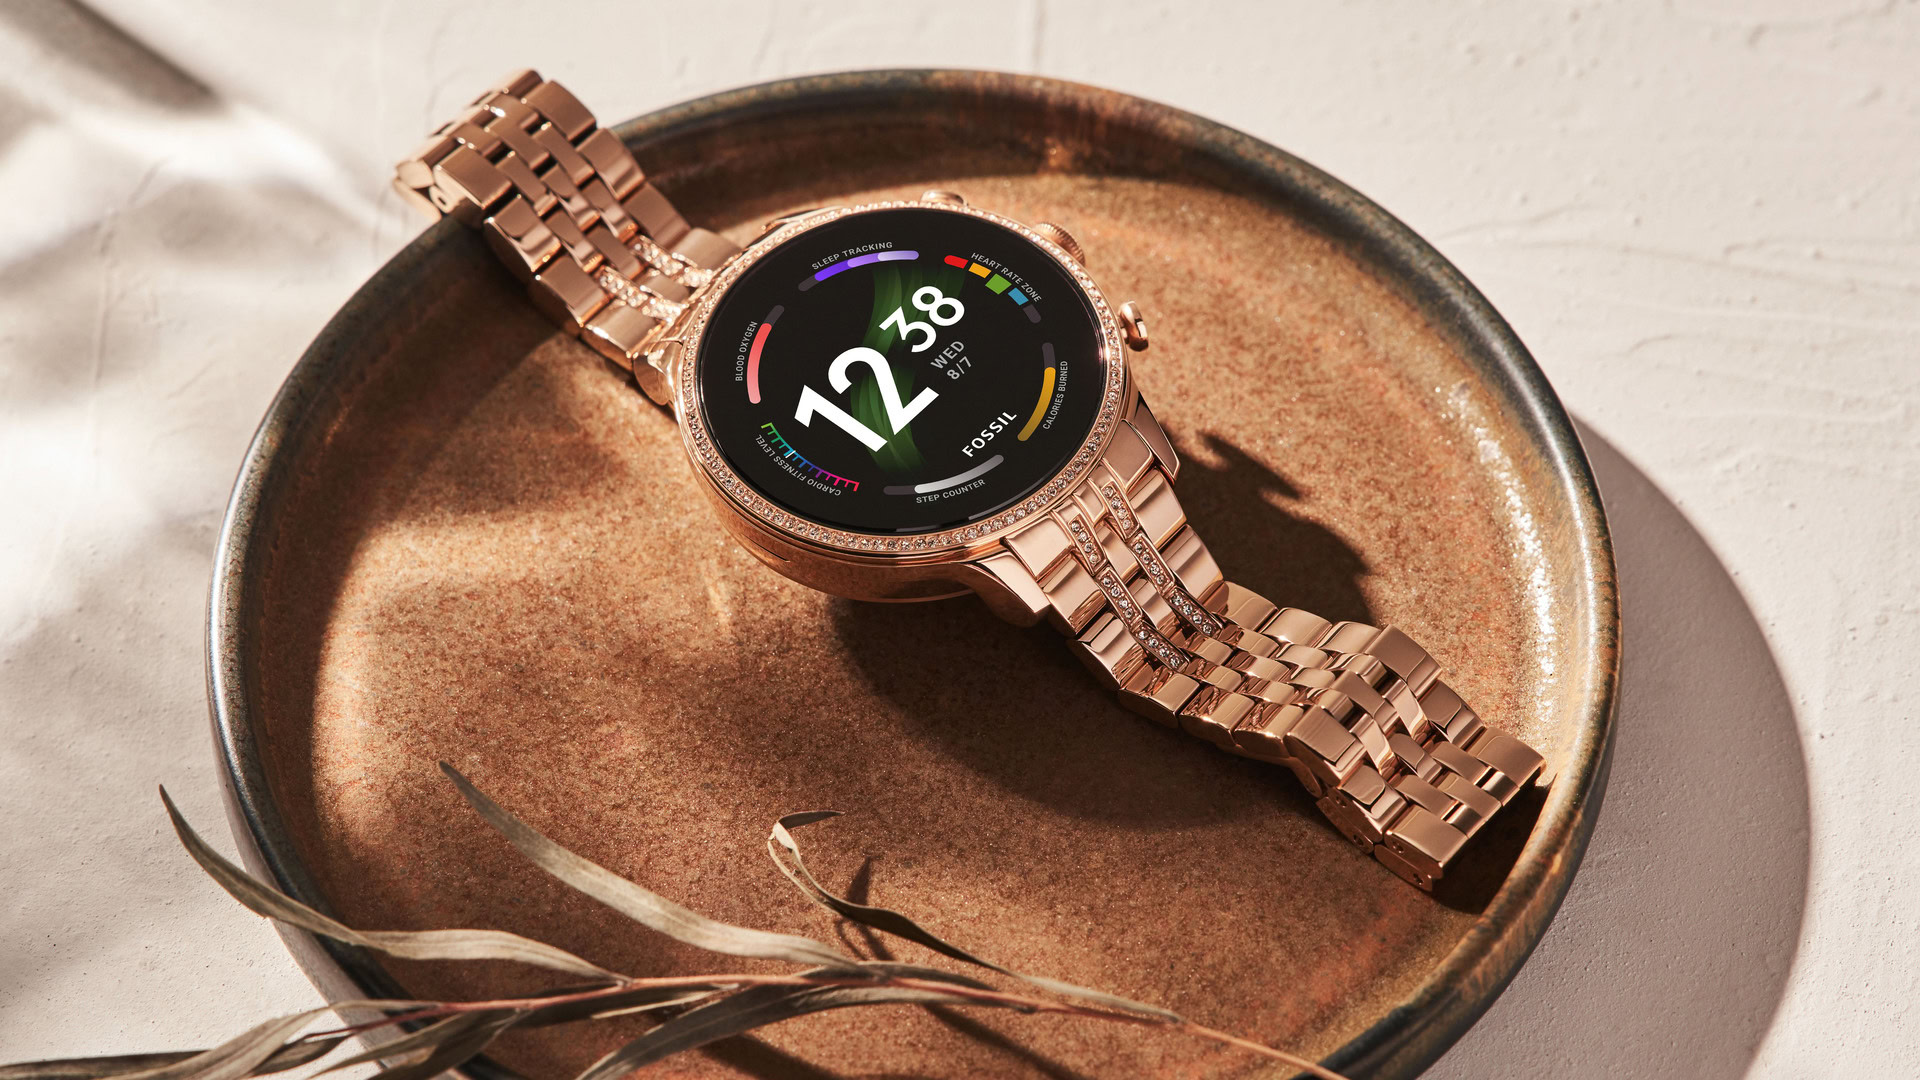 The Fossil Gen 6 Smartwatch in gold stainless steel in a bowl.